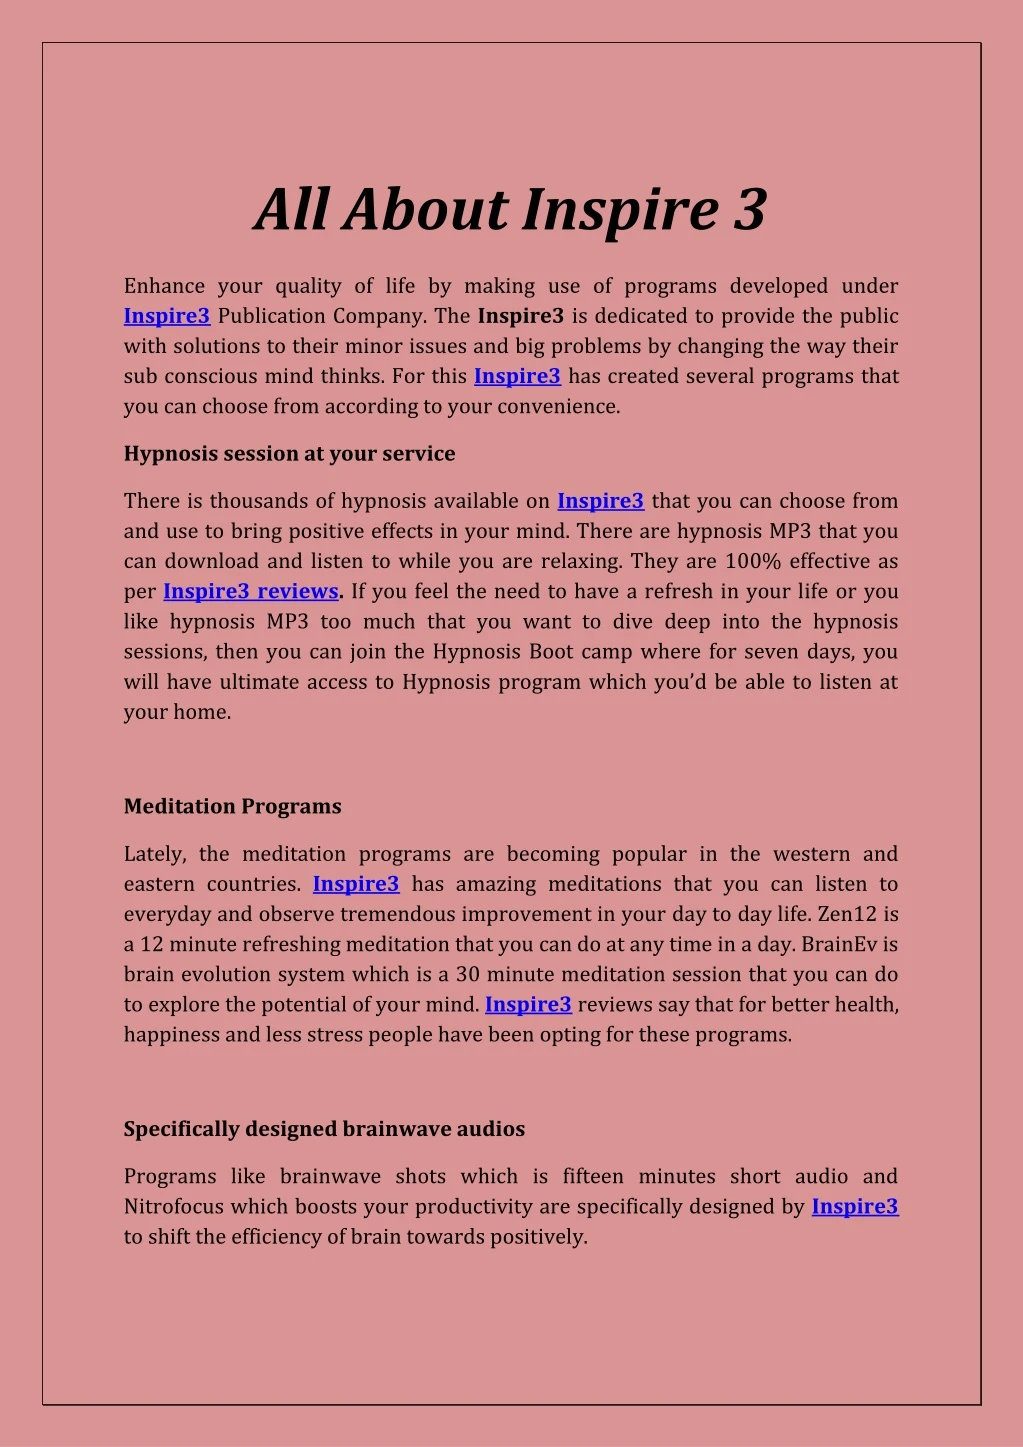 all about inspire 3